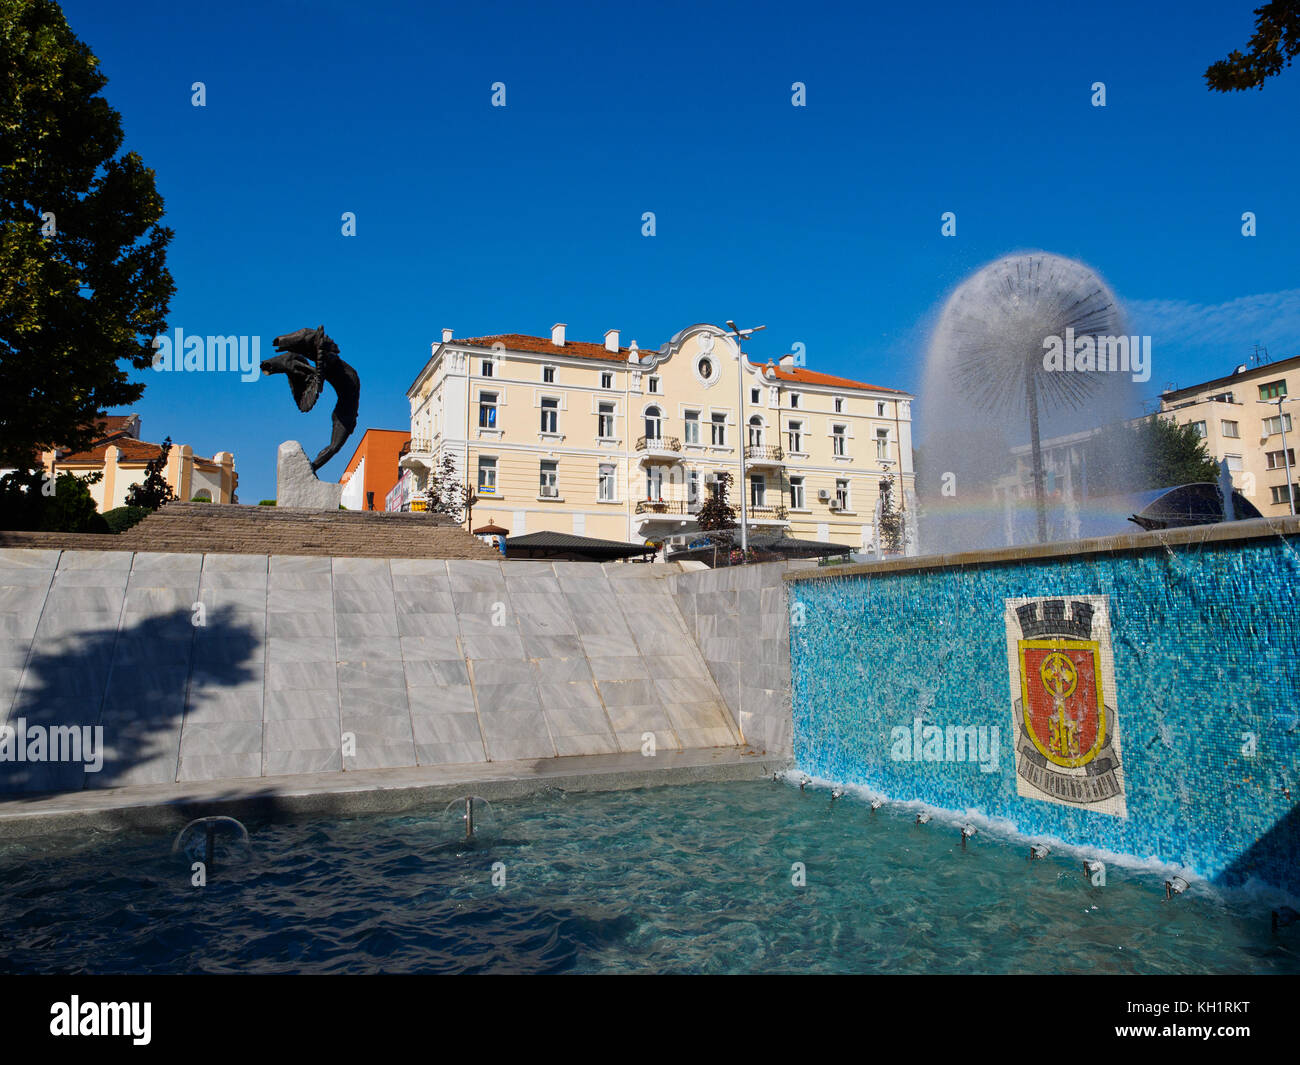 The Monument of Envy and the fountain in the town of Haskova, Bulgaria Stock Photo